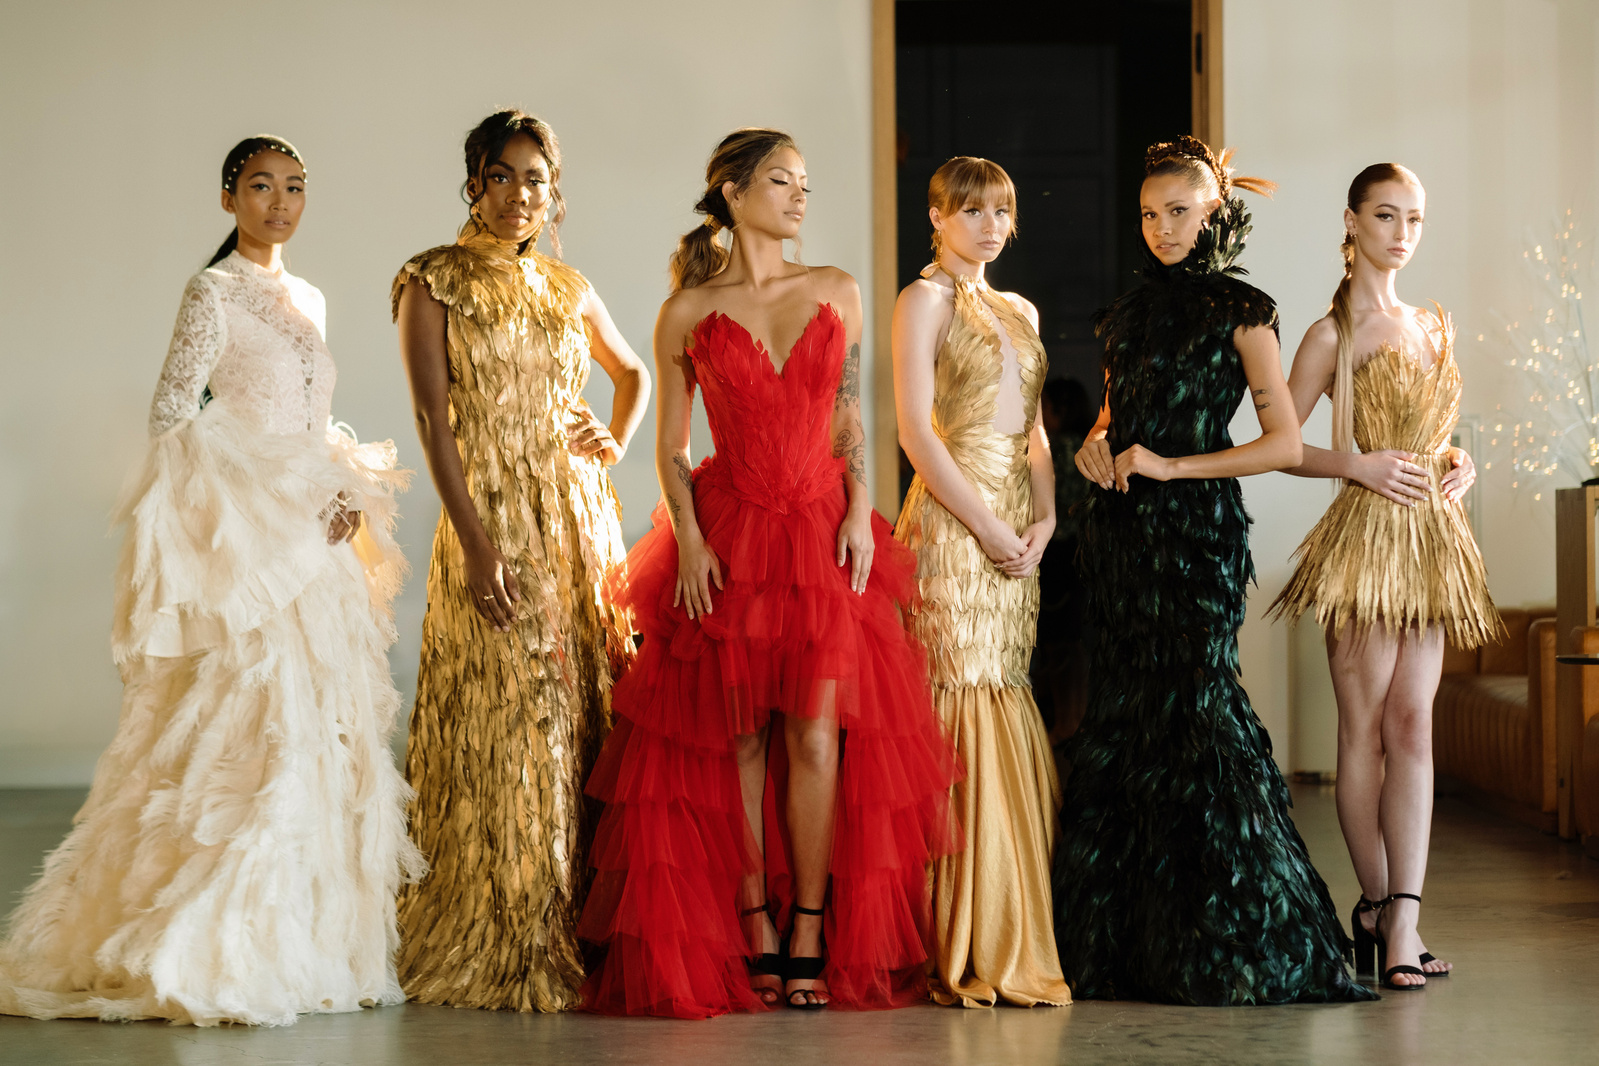 Models wearing couture feather dresses in white, gold, red, and black